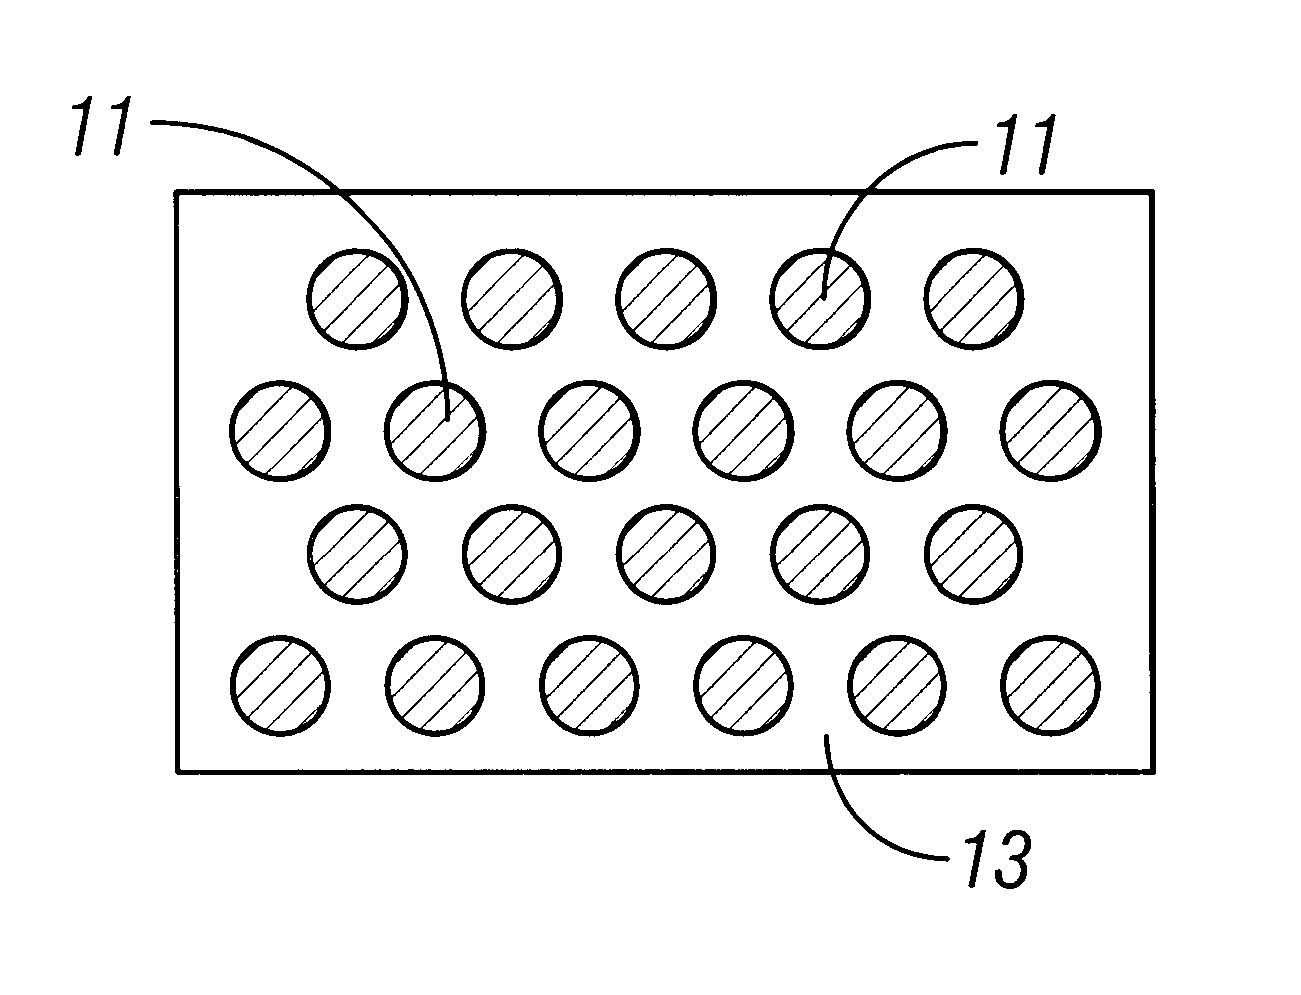 Personal therapeutic device using far infrared radiation